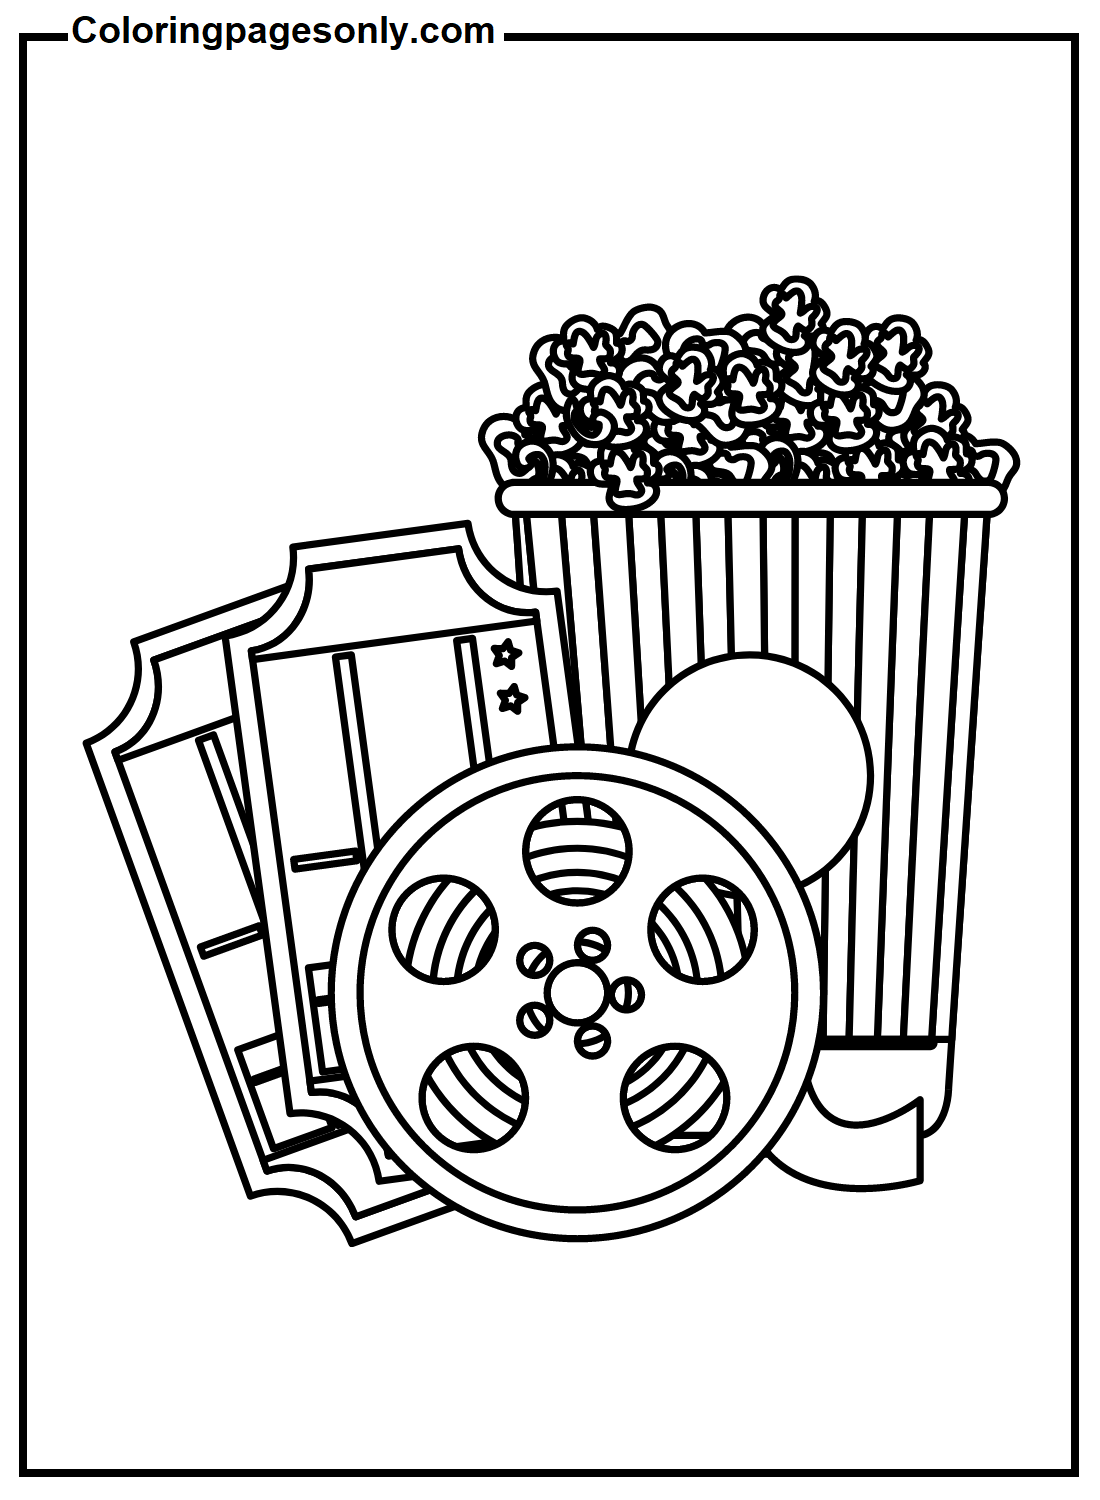 Cinema Popcorn For Kids Coloring Pages